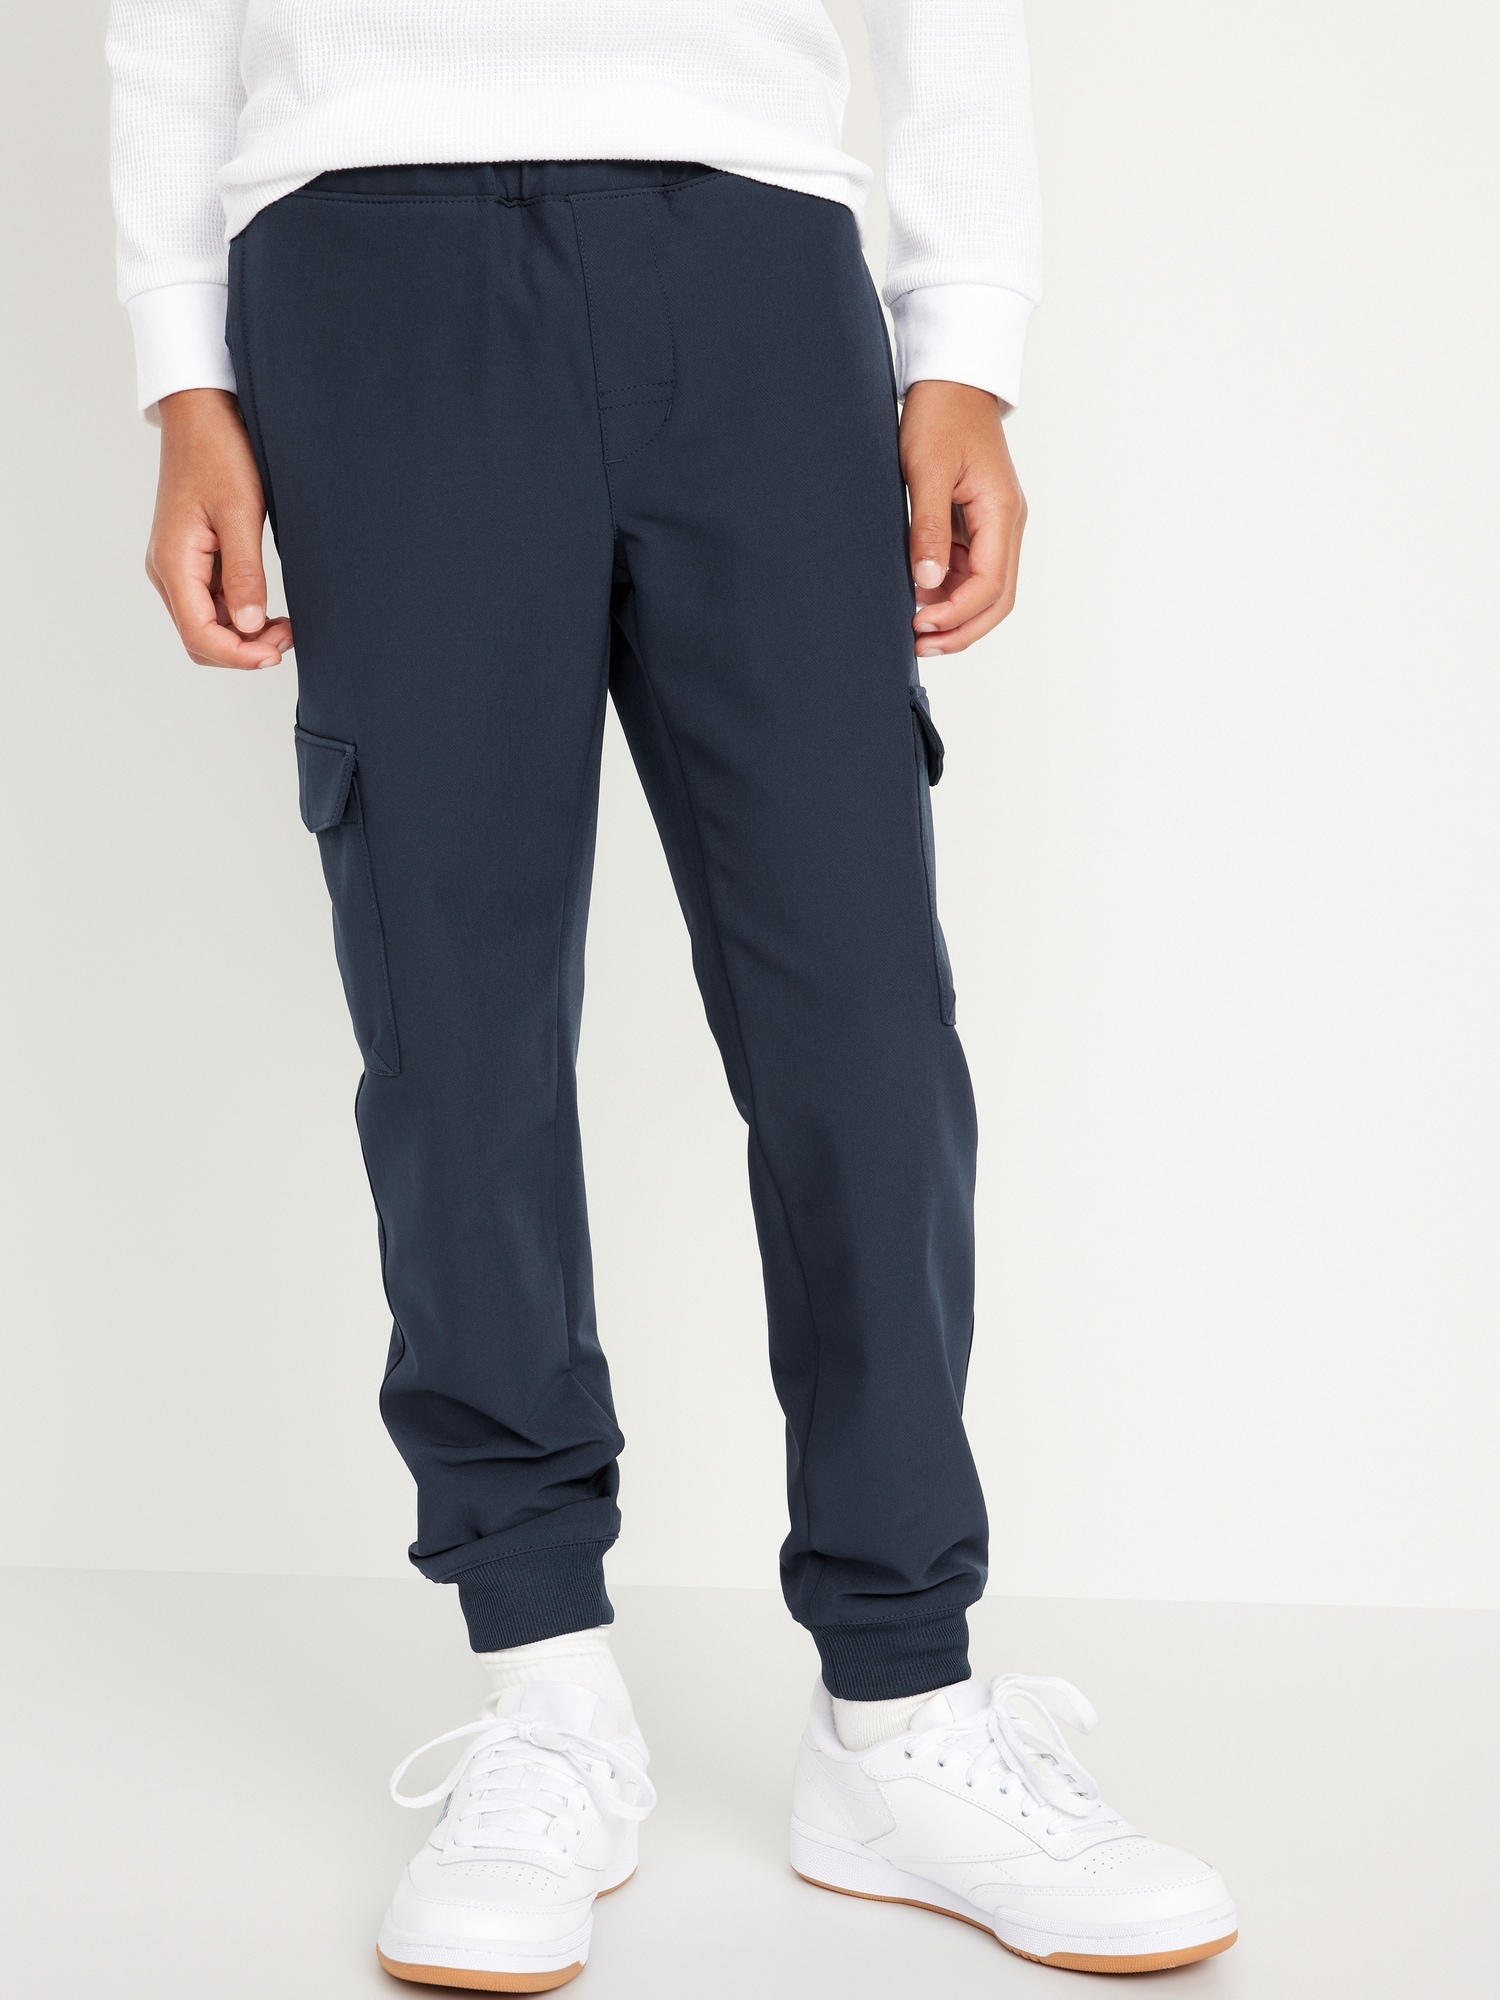 Buy Heavy Weight Cargo Pocket Stretch Twill Jogger Pants (8-18) Boys  Bottoms from Arcade Styles. Find Arcade Styles fashion & more at